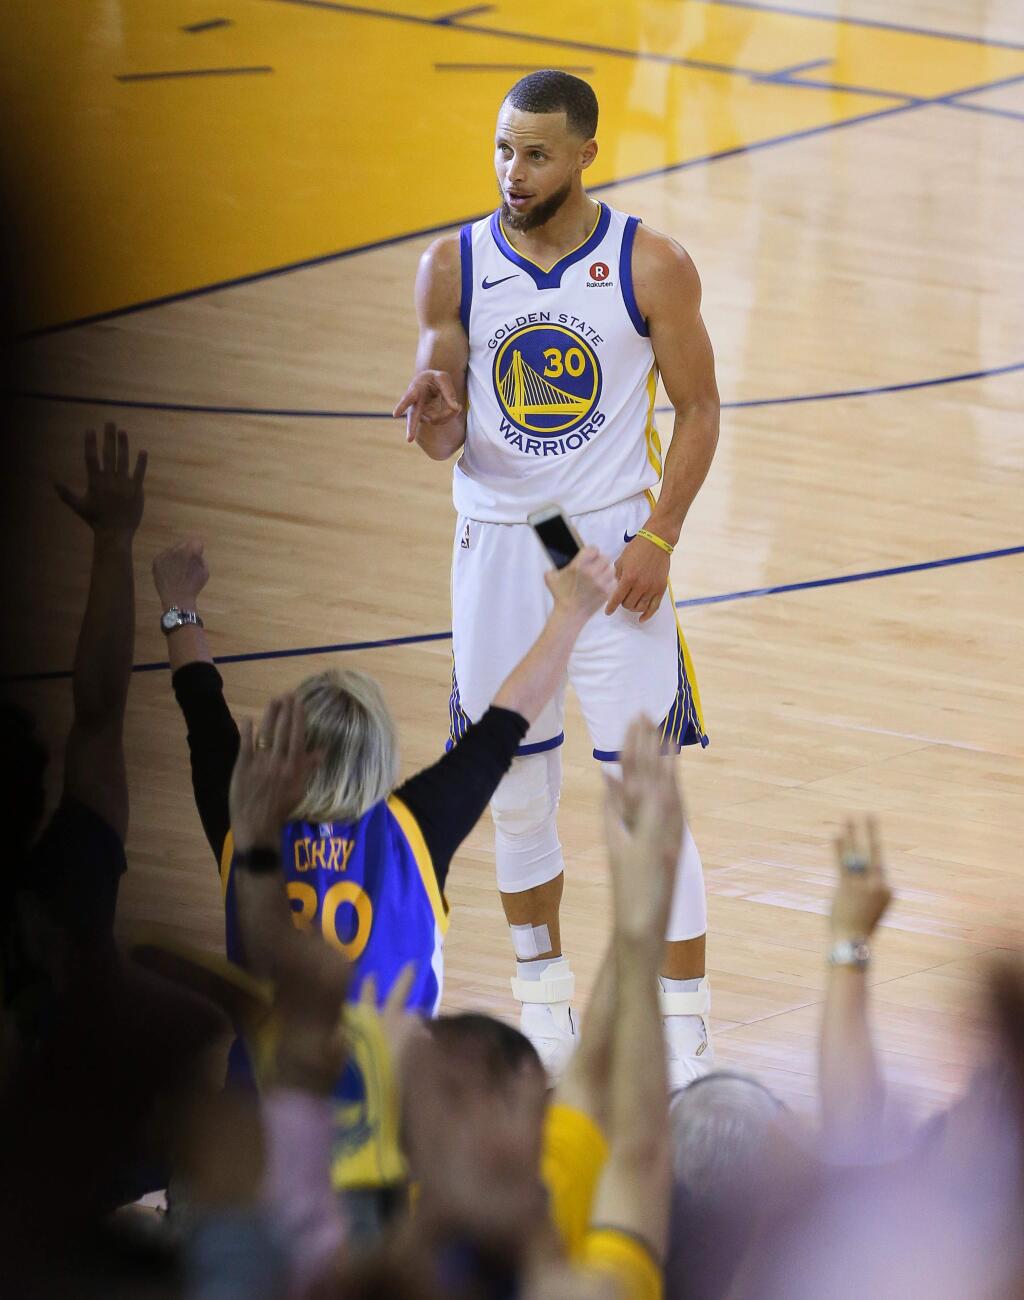 Golden State Warriors guard Stephen Curry celebrates a three-pointer to beat the halftime buzzer against the Cleveland Cavaliers, during Game 1 of the NBA Finals in Oakland on Thursday, May 31, 2018. (Christopher Chung/ The Press Democrat)